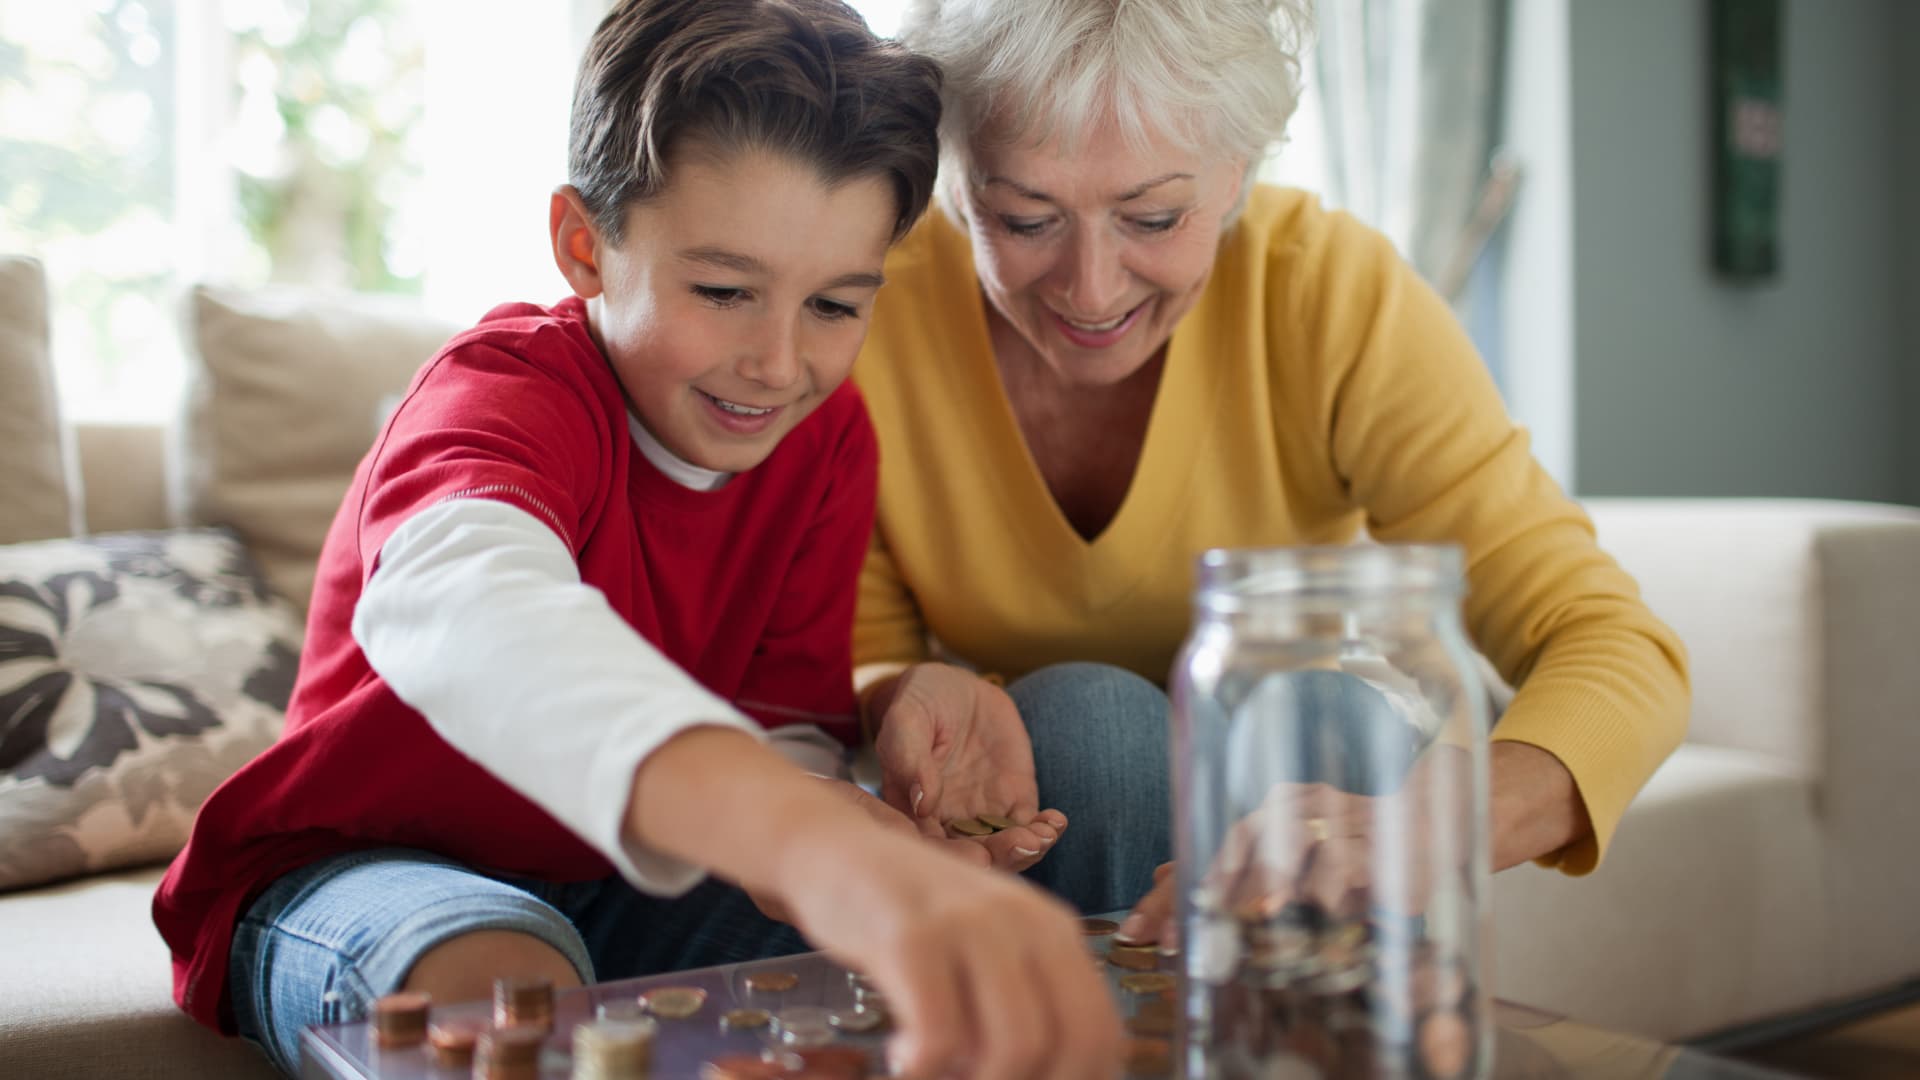 When it comes to passing wealth on to kids, women have very different ideas to men